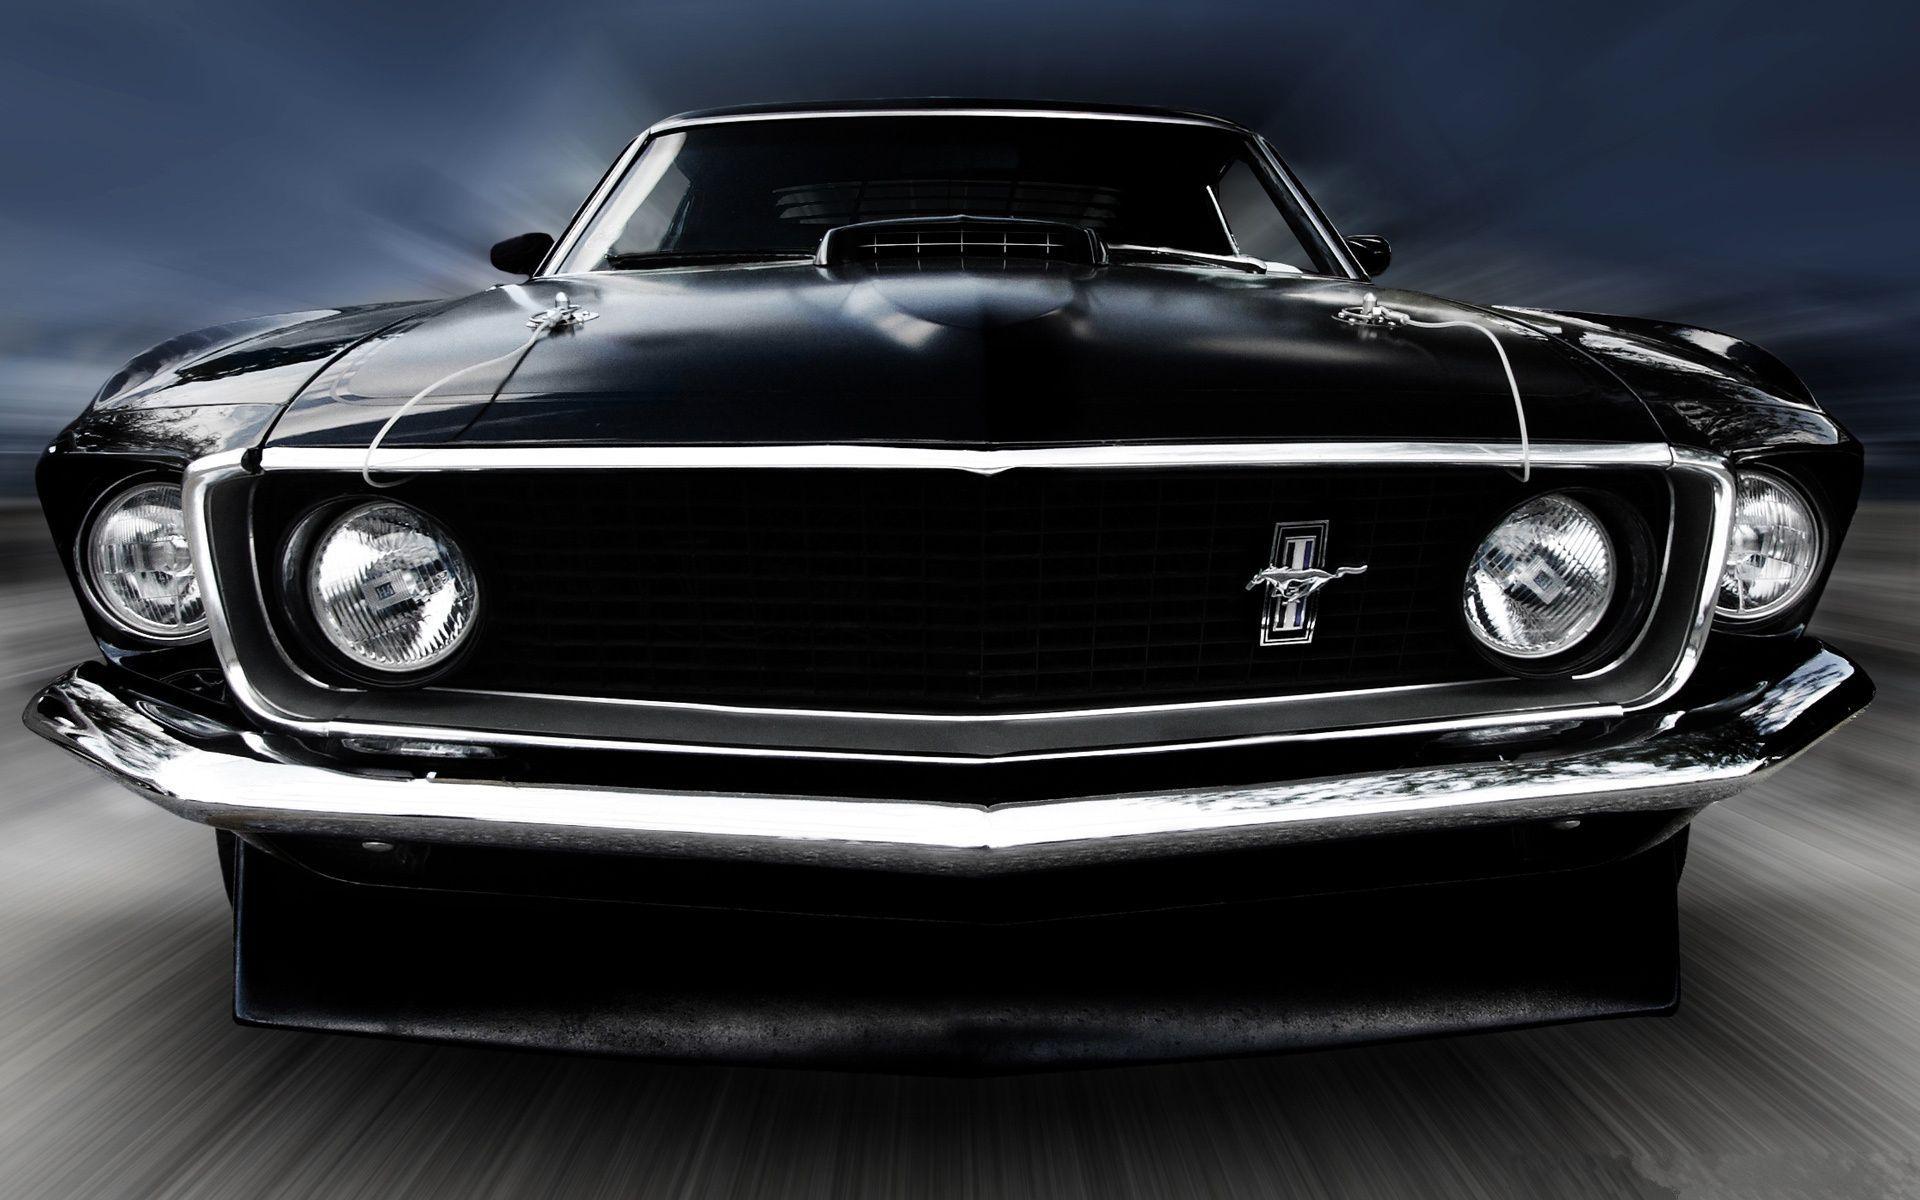 Ford Mustang Black Front HD Wallpaper. Ford mustang